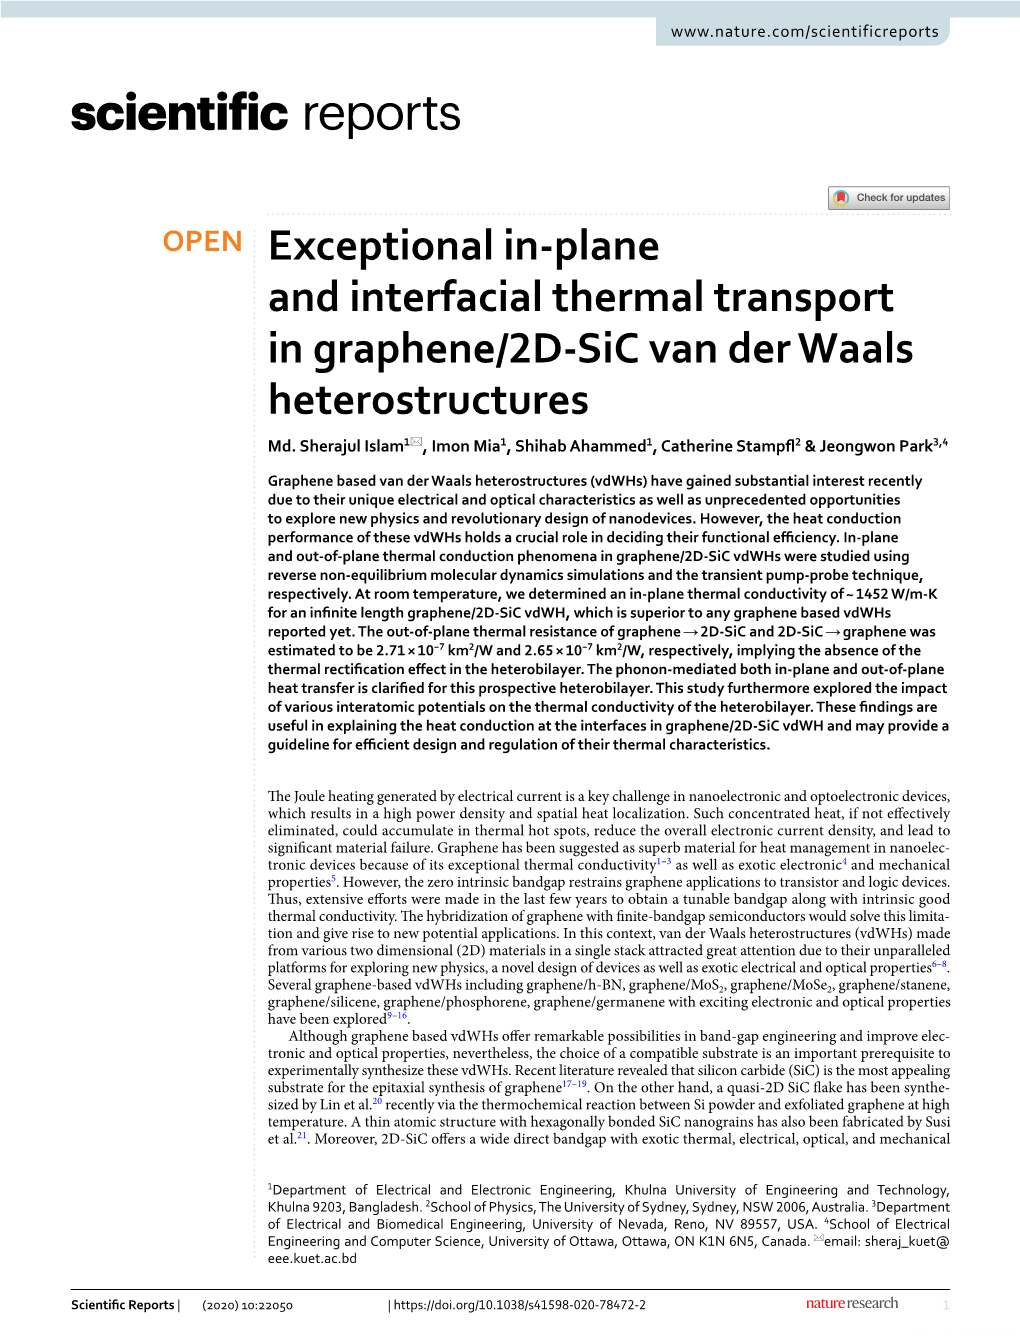 Exceptional In-Plane and Interfacial Thermal Transport in Graphene/2D